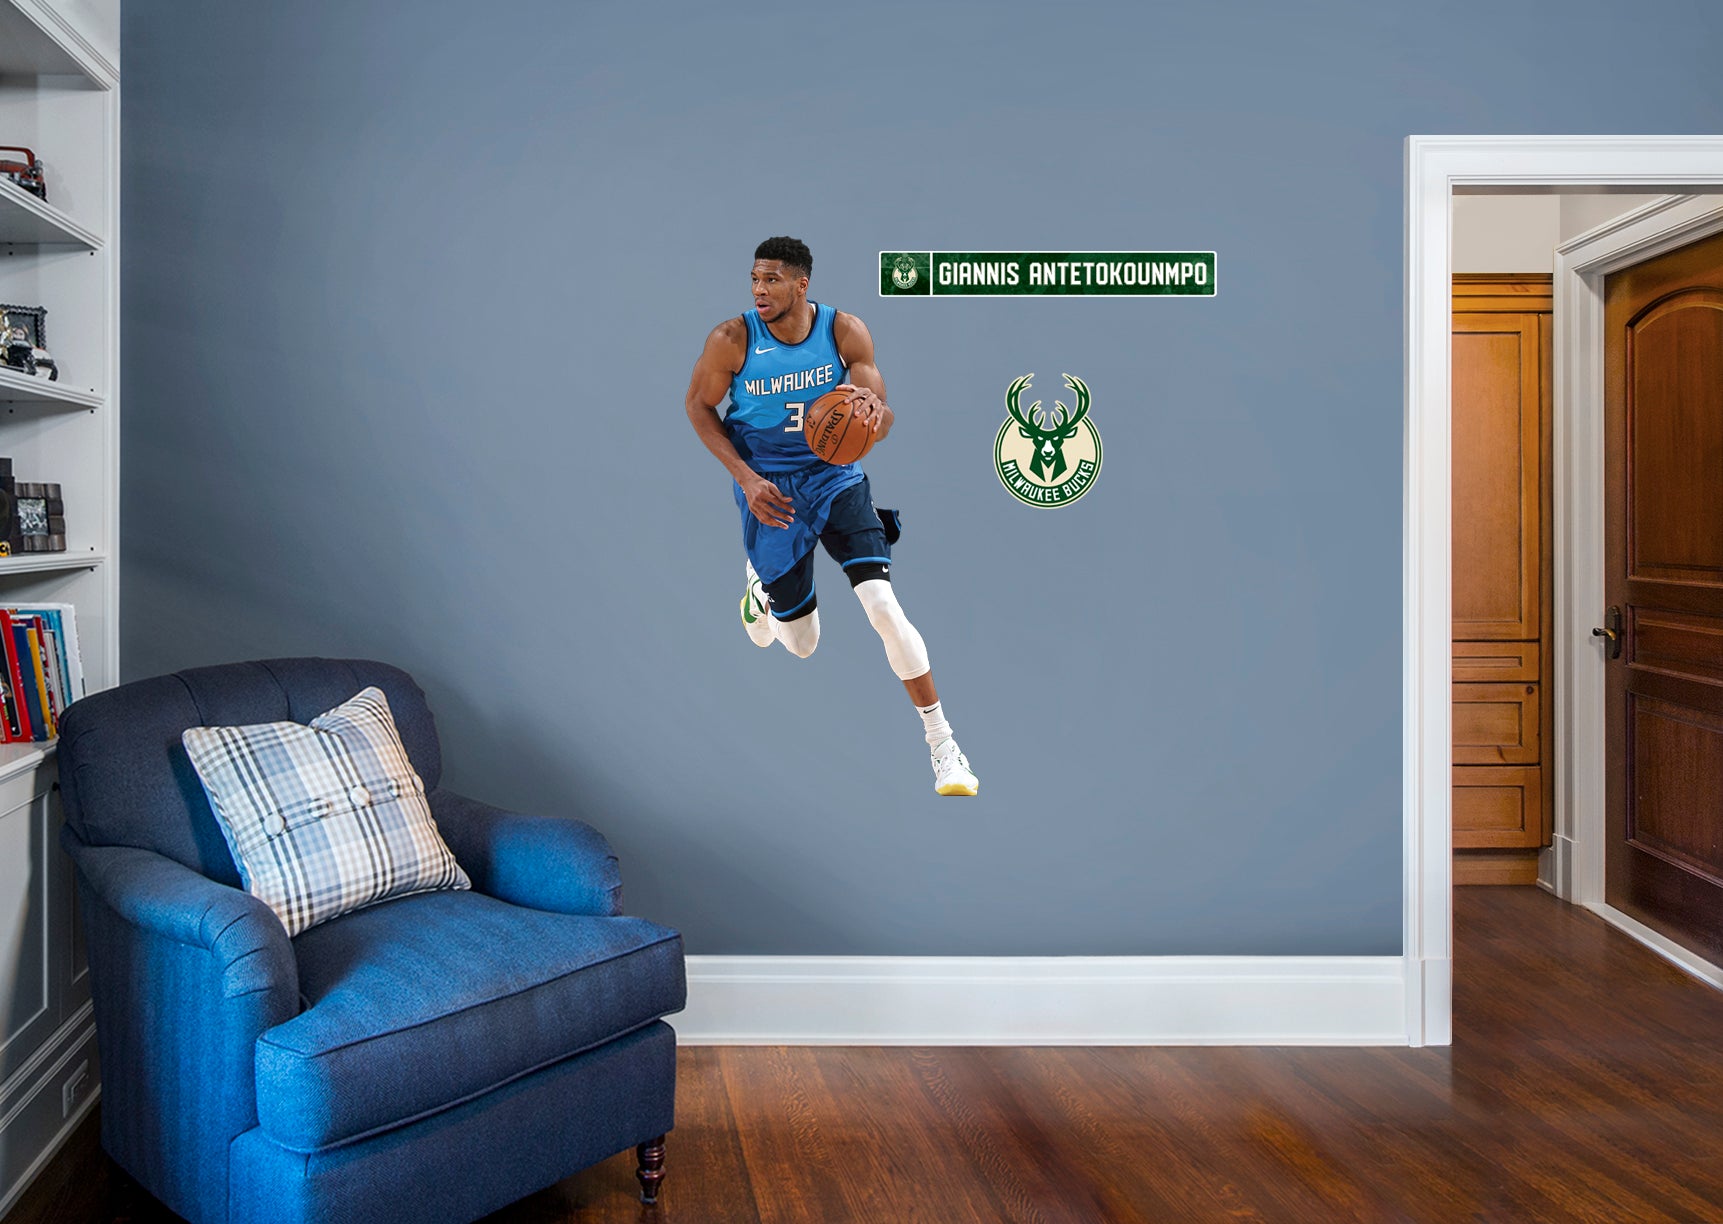 Giannis Antetokounmpo 2021 for Milwaukee Bucks - Officially Licensed NBA Removable Wall Decal Giant Athlete + 2 Decals (27"W x 5